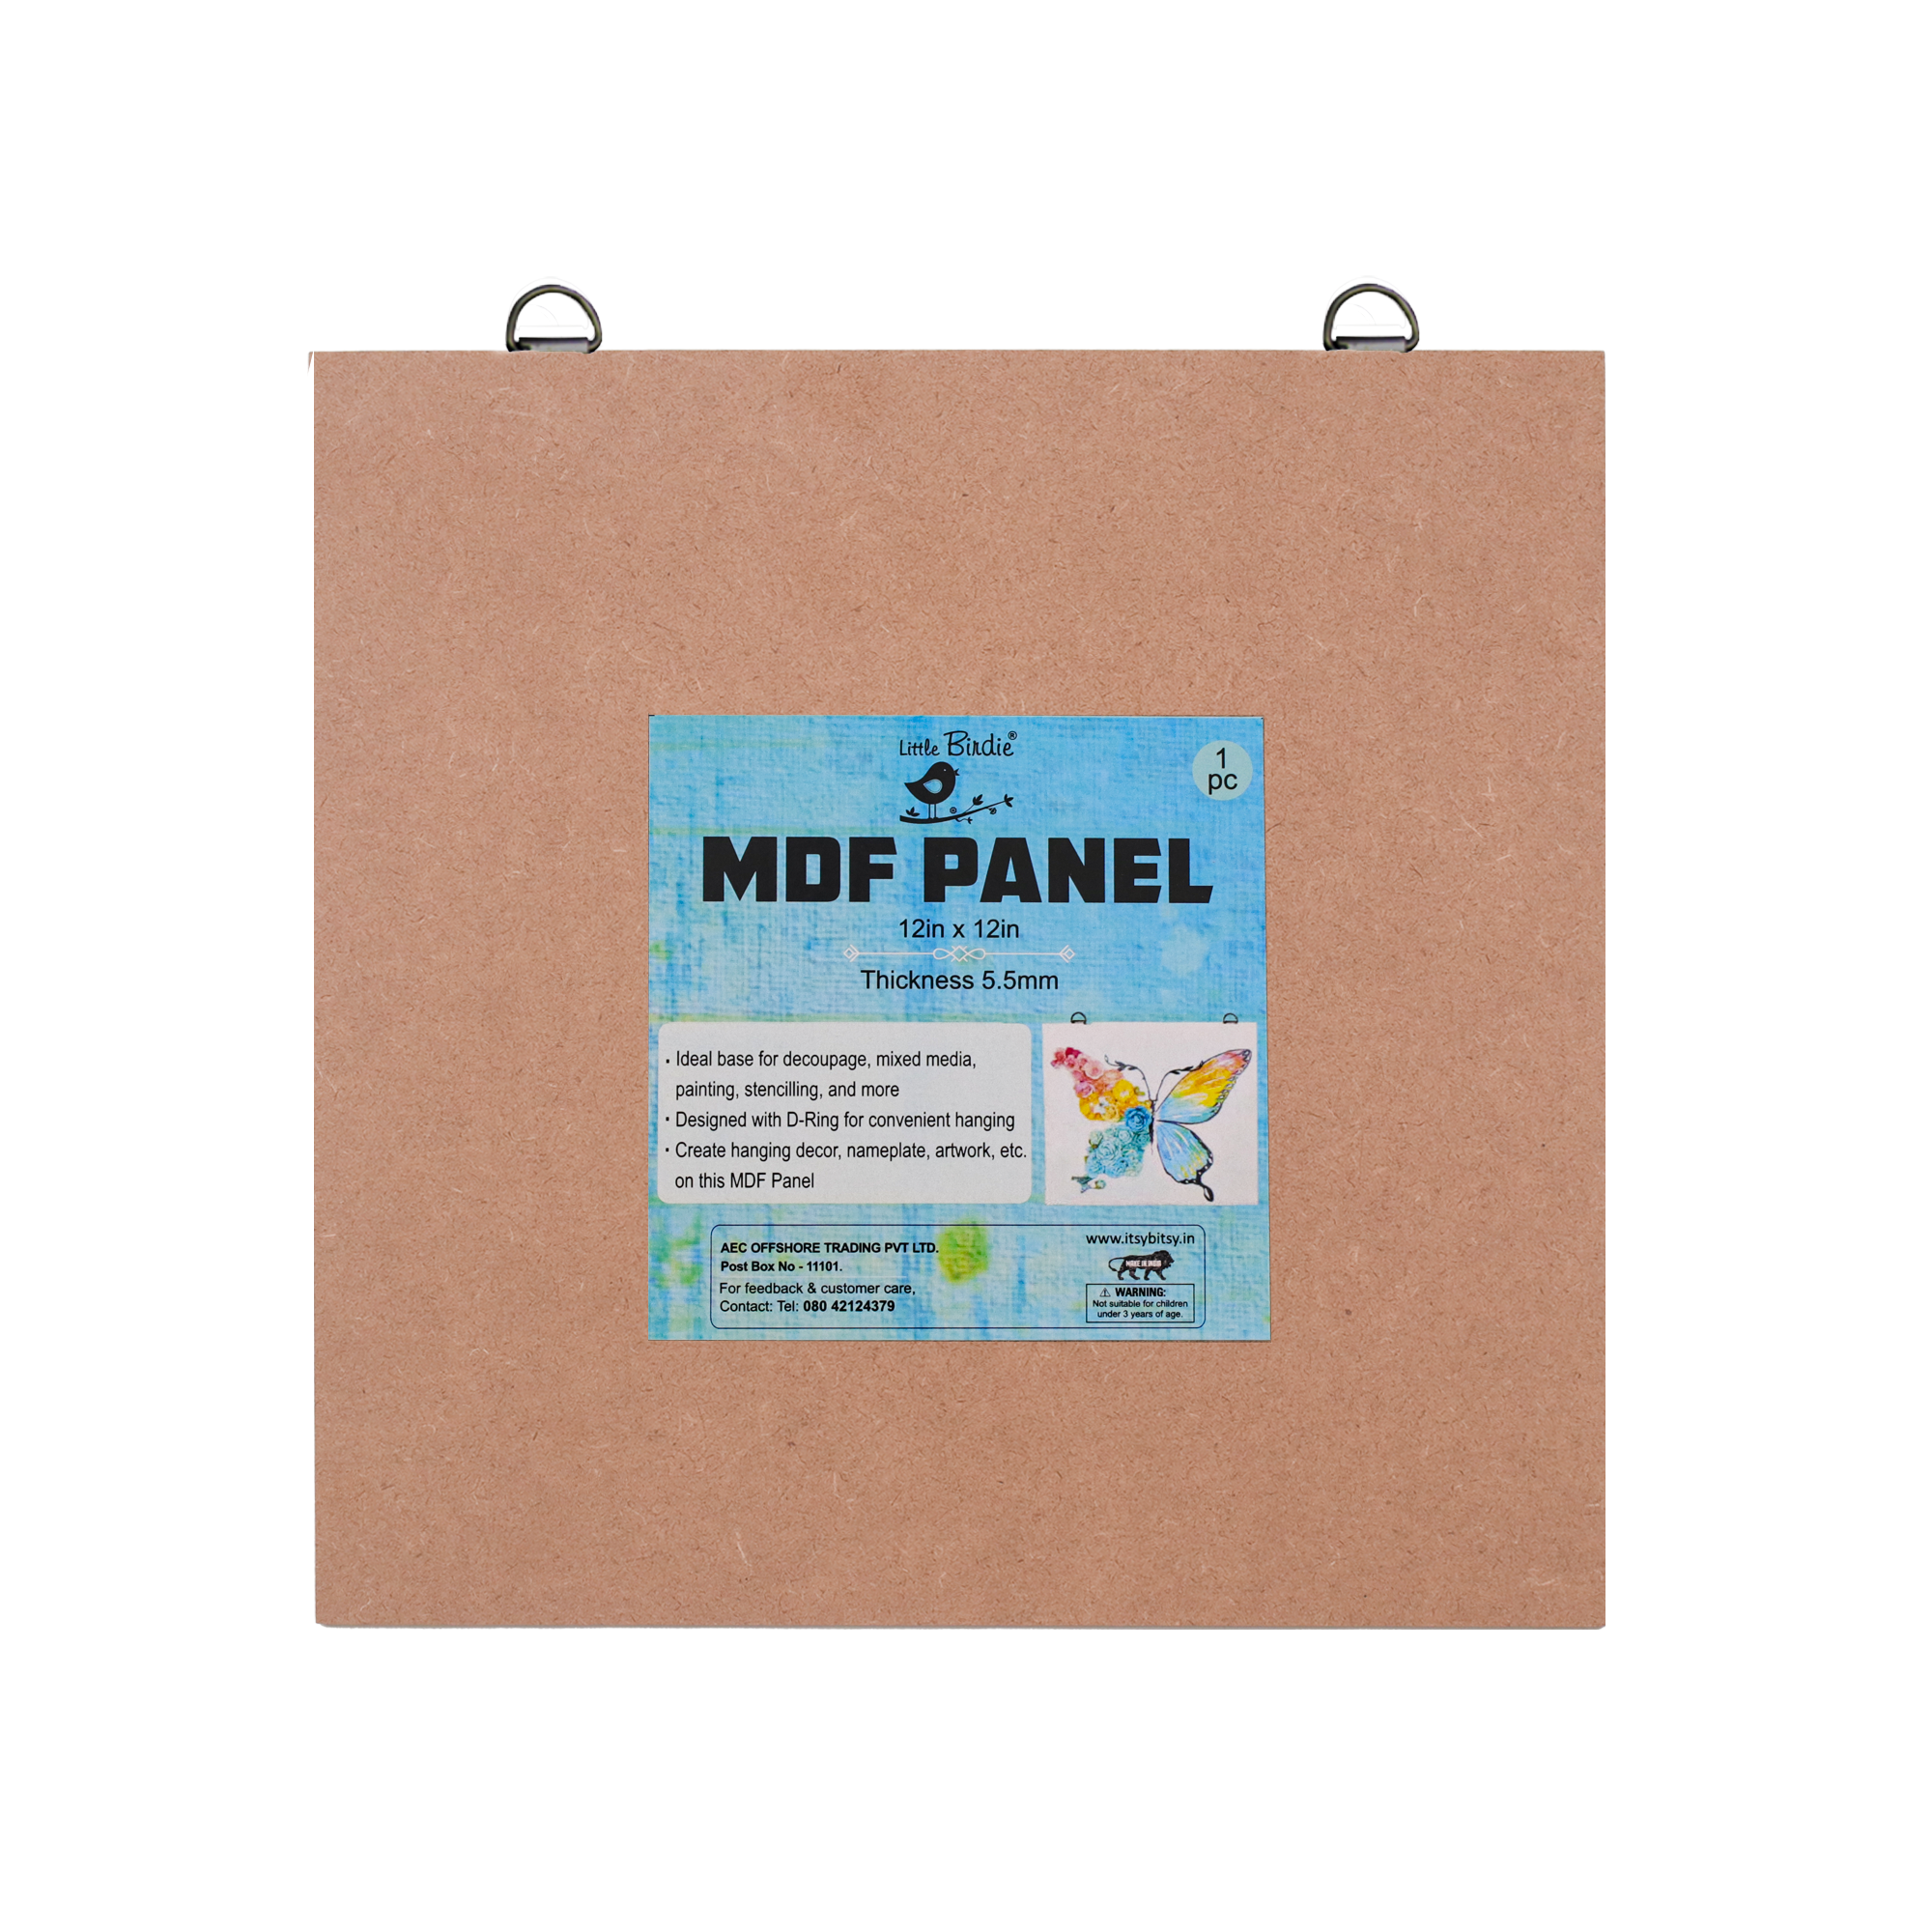 Mdf Hanging Panel With D Ring 12 X 12Inch 5.5Mm Thick 1Pc Sw Lb